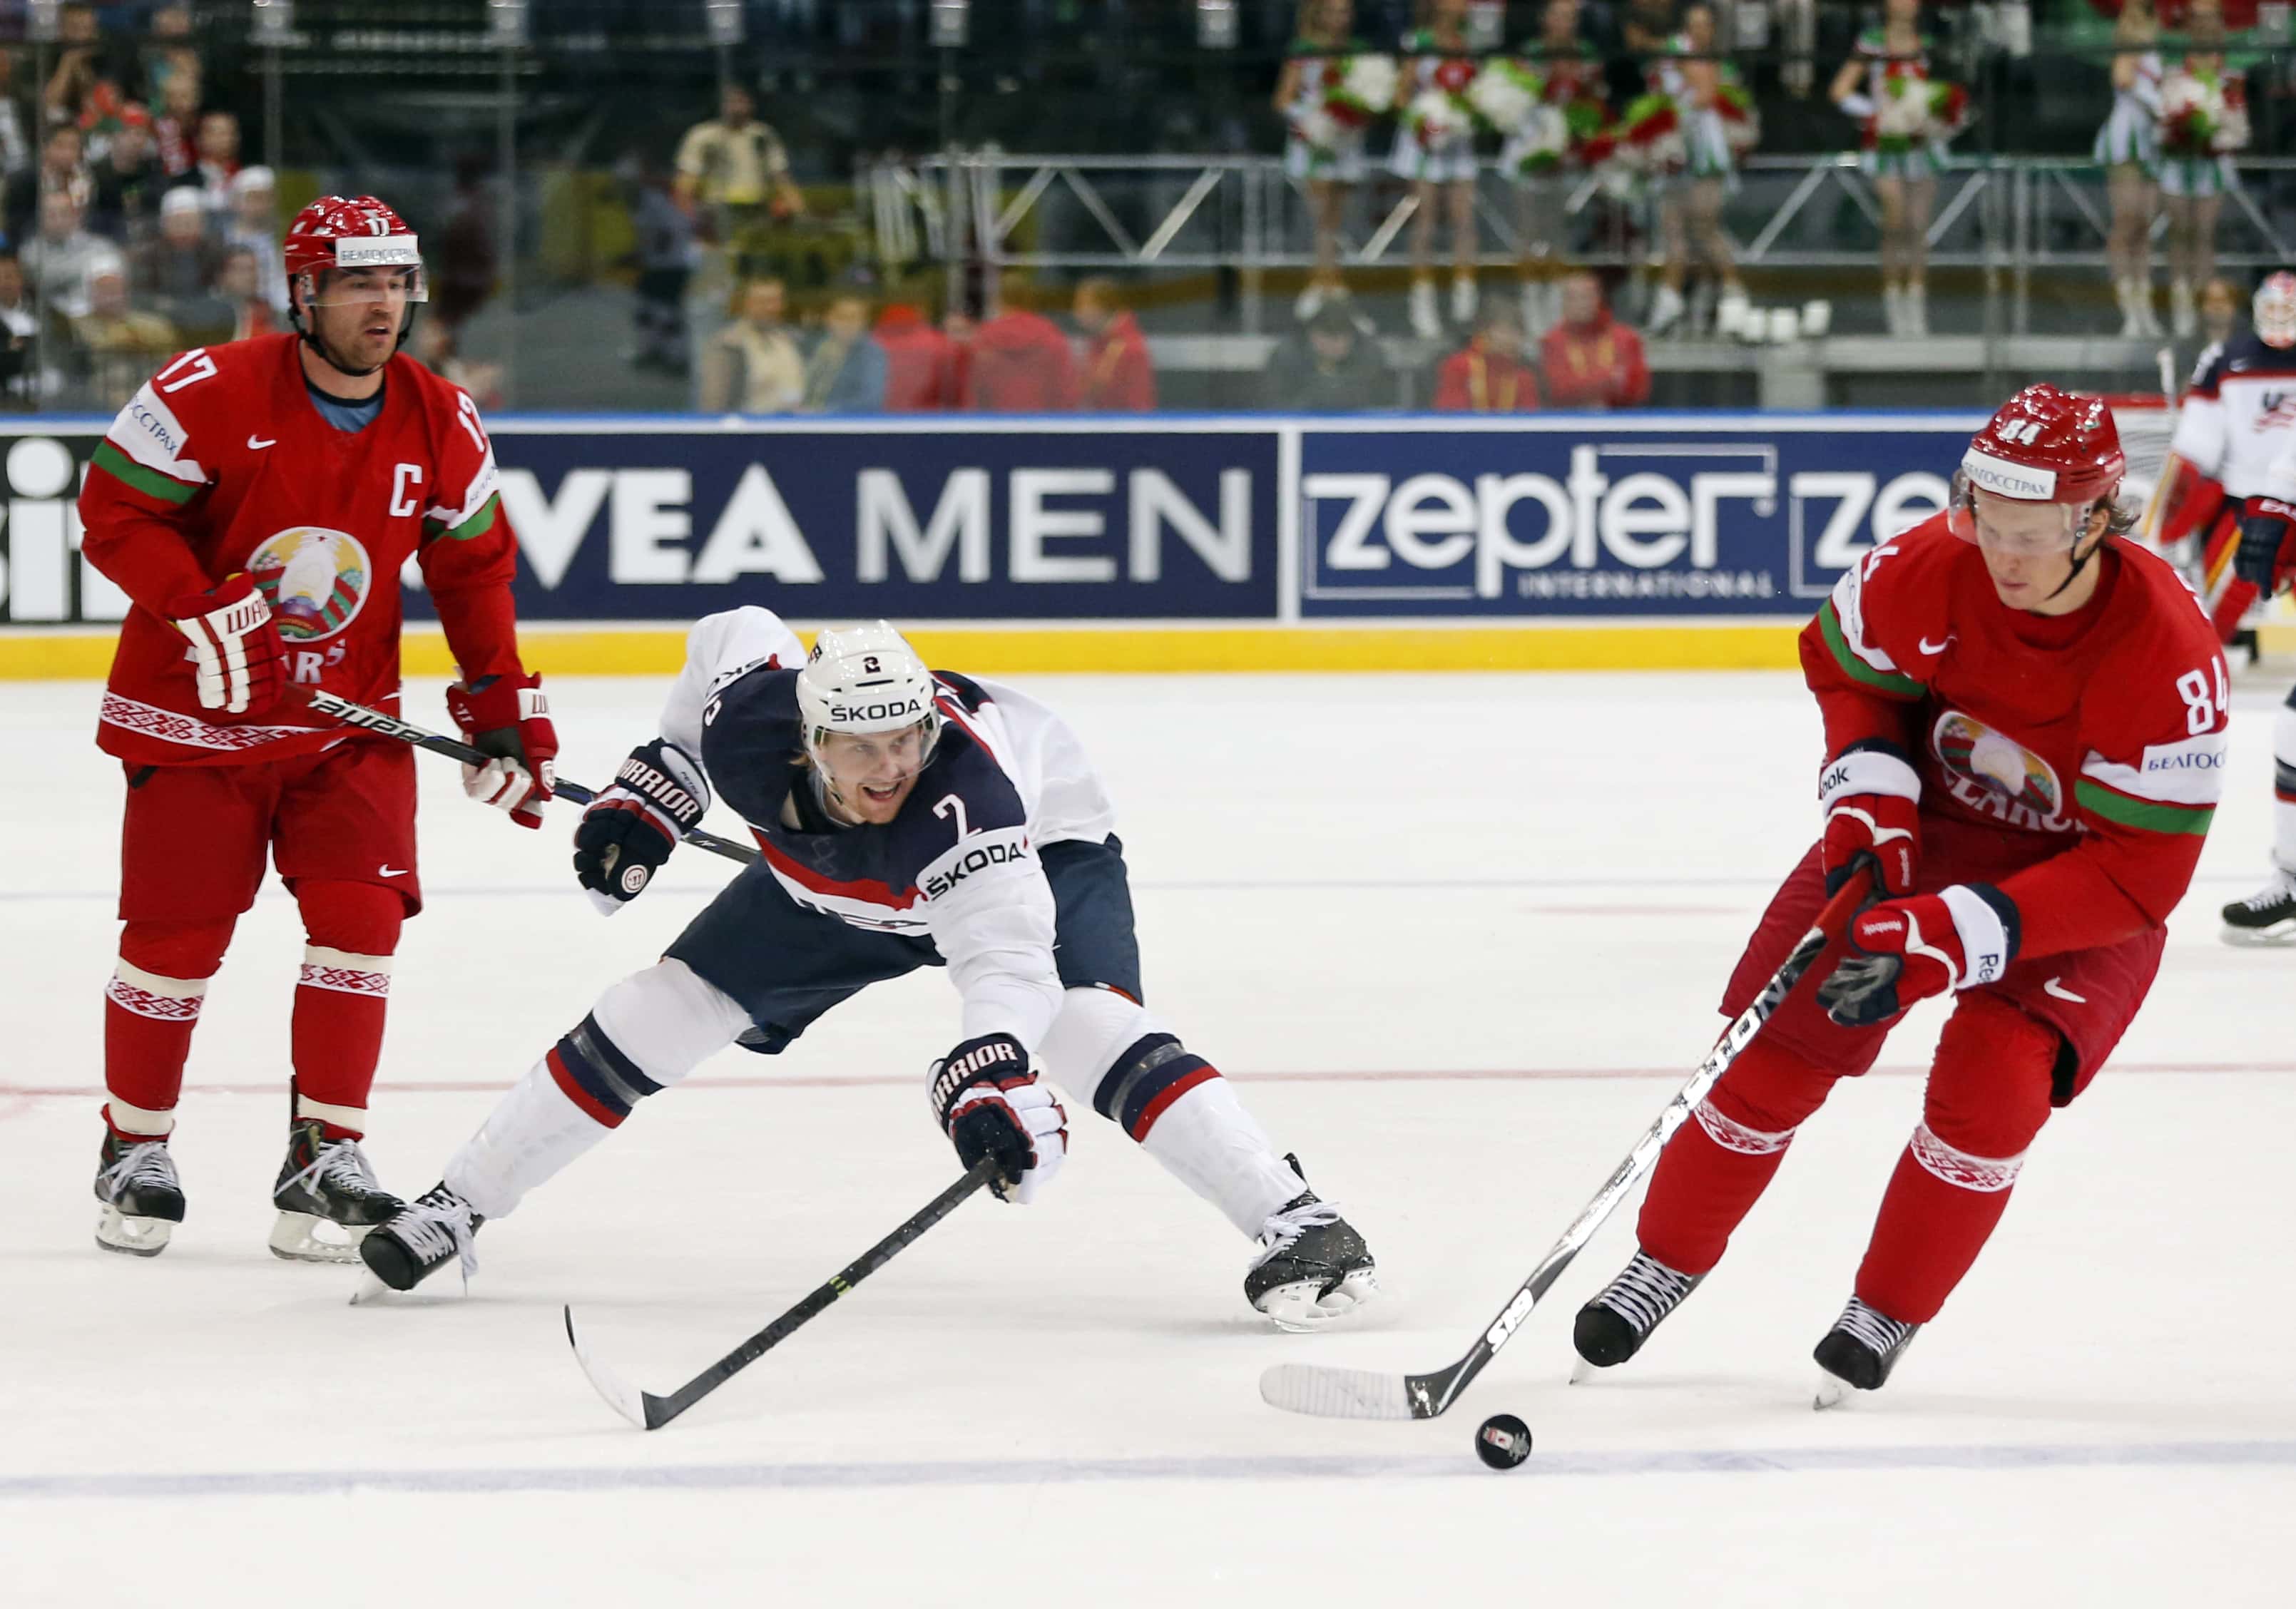 USA defender Jeff Petry, centre, is challenged by Belarus forward Alexei Kalyuzhny and Belarus forward Mikhail Grabovski, during a match between Belarus and USA at the Ice Hockey World Championship in Minsk, 9 May 2014., AP Photo/Darko Bandic